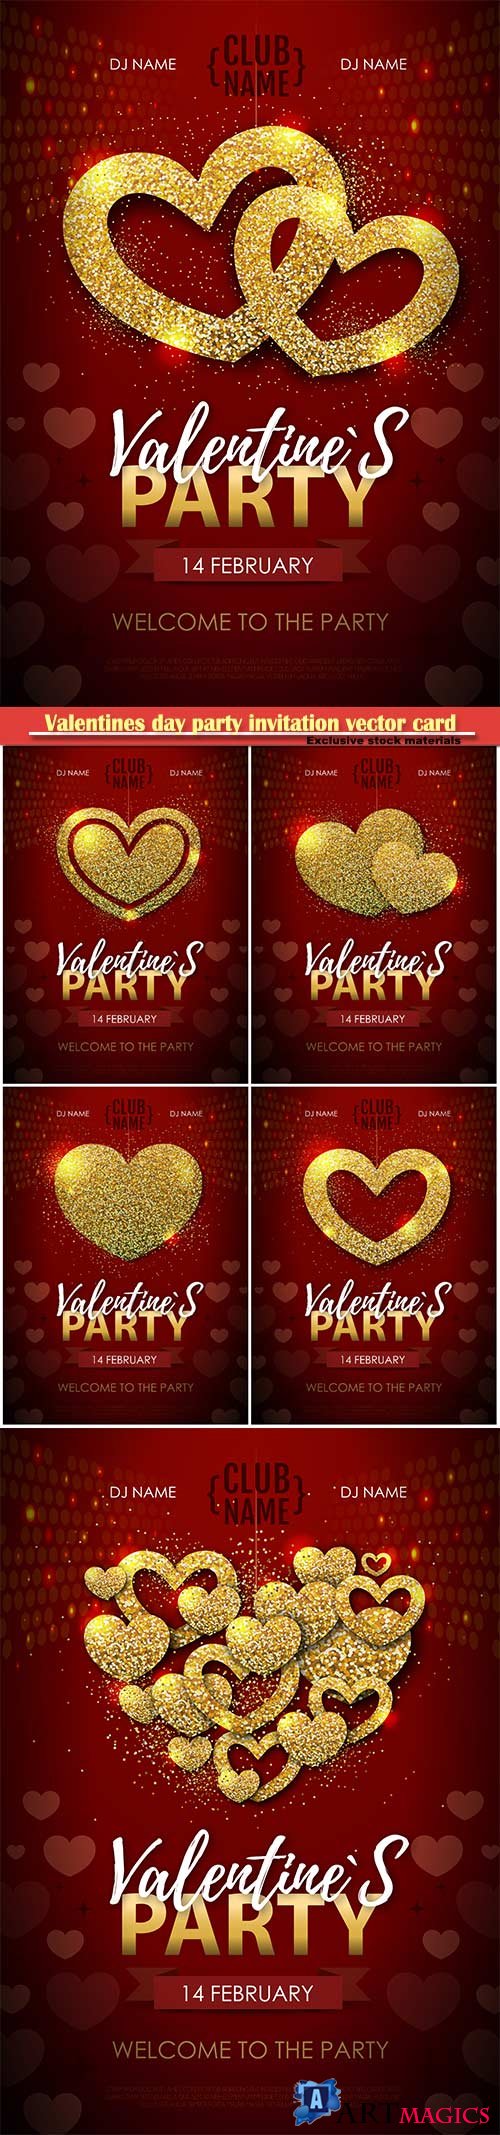 Valentines day party invitation vector card # 13